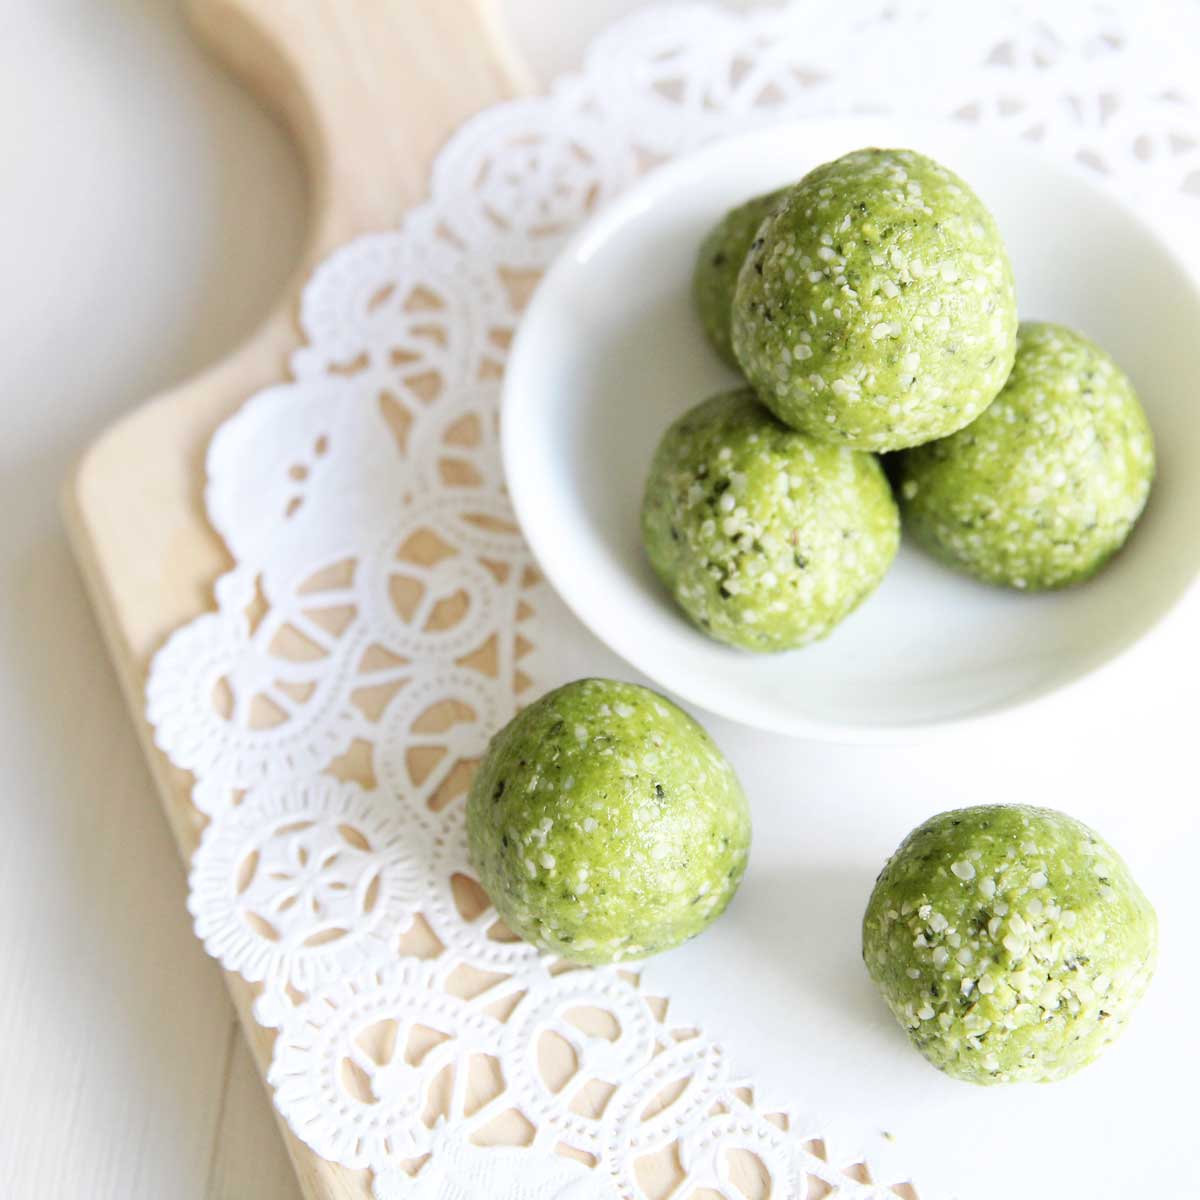 Power Packed Matcha Latte Protein Balls Recipe with Collagen Peptides - Almond Joy Protein Bars